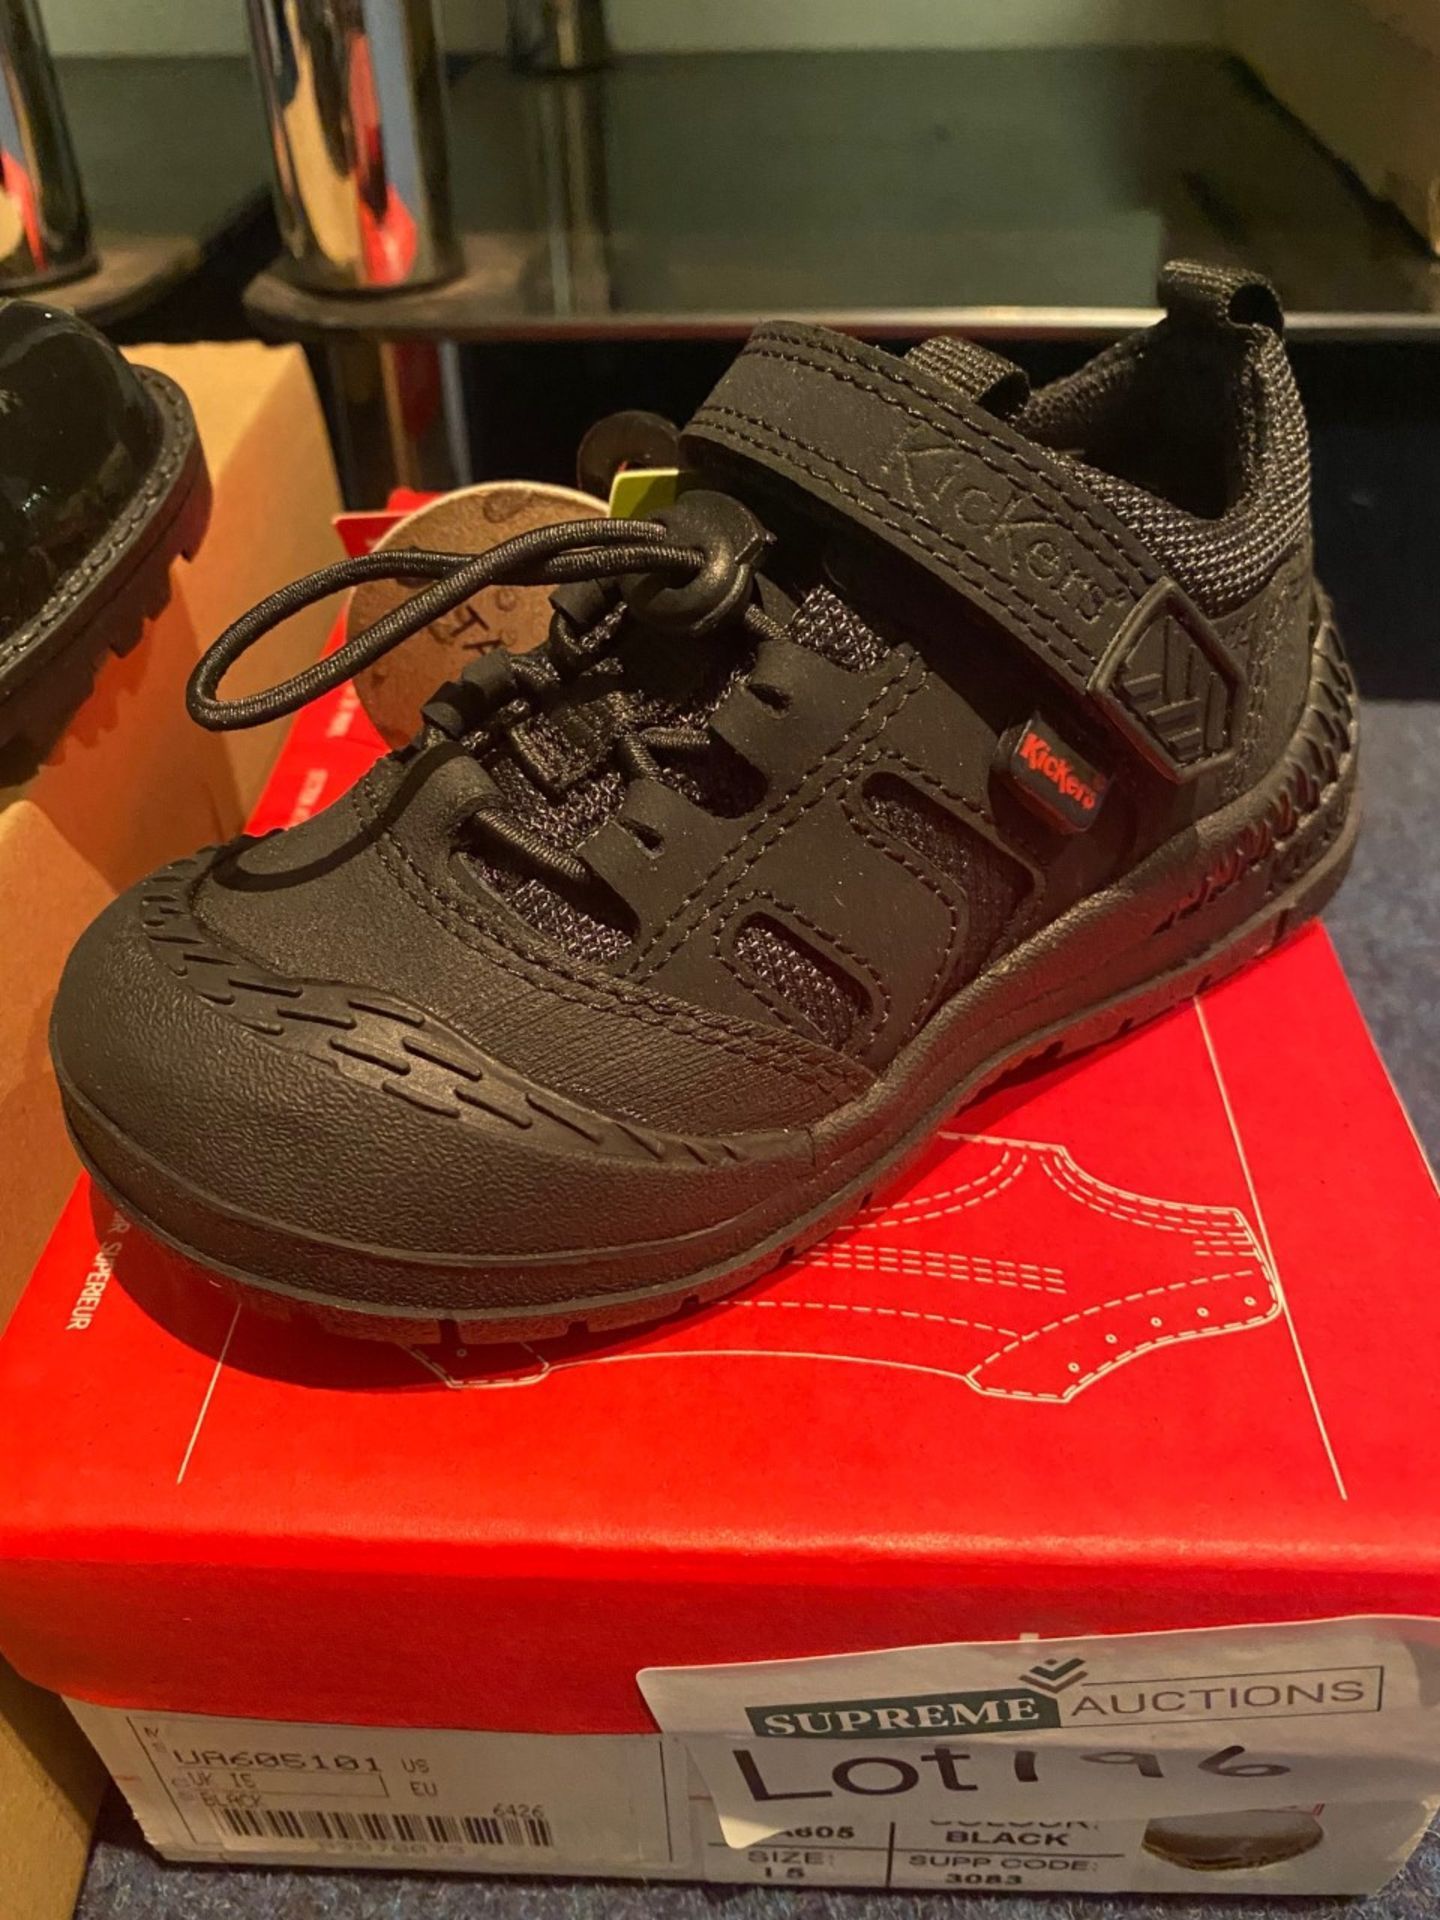 NEW & BOXED KICKERS BLACK SHOE SIZE INFANT 5 (196/21)